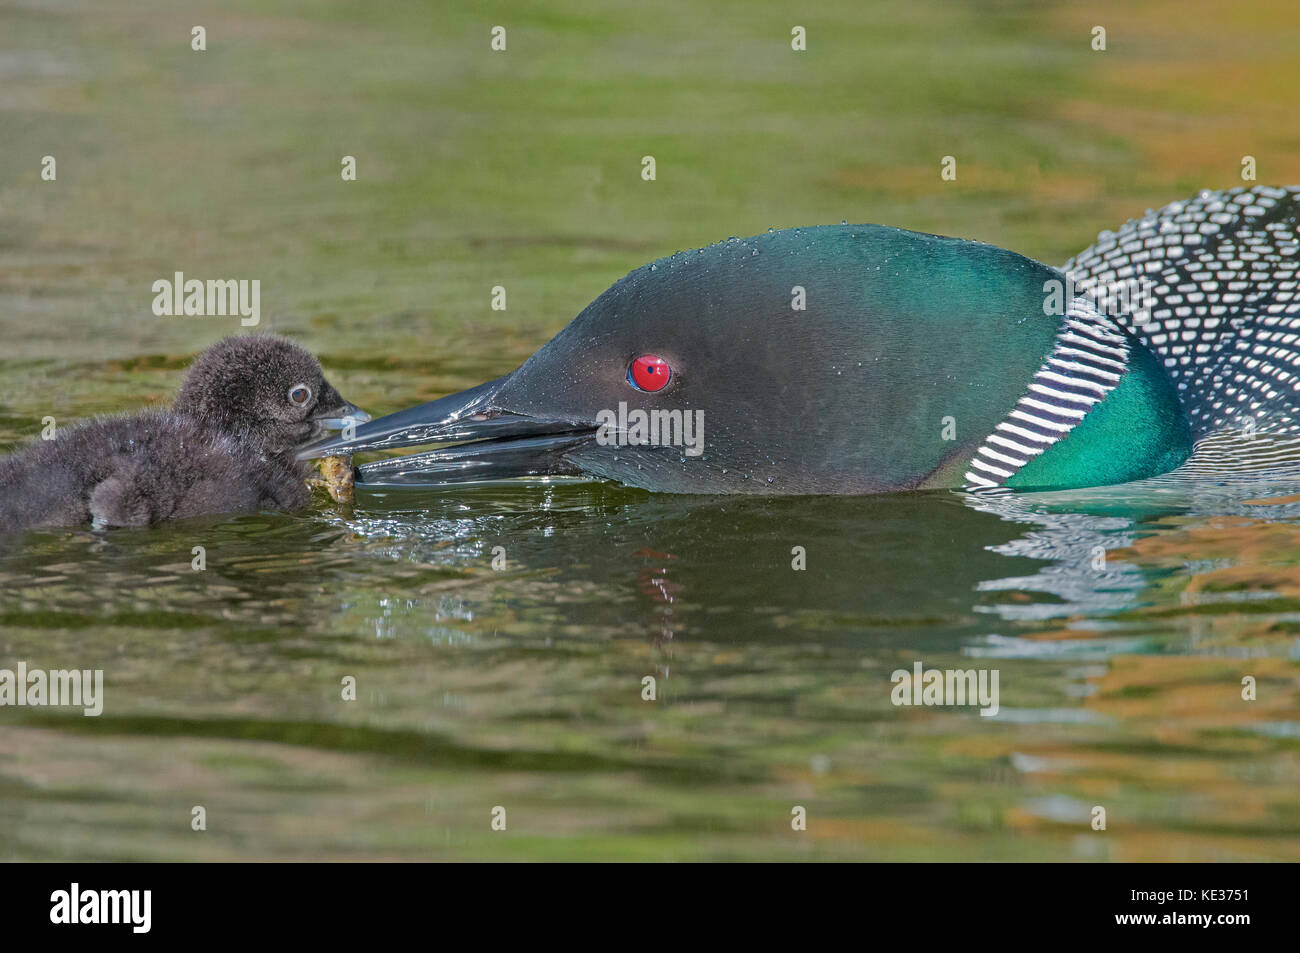 Adult common loon (Gavia immer) feeding two-week old chick, central Alberta, Canada Stock Photo